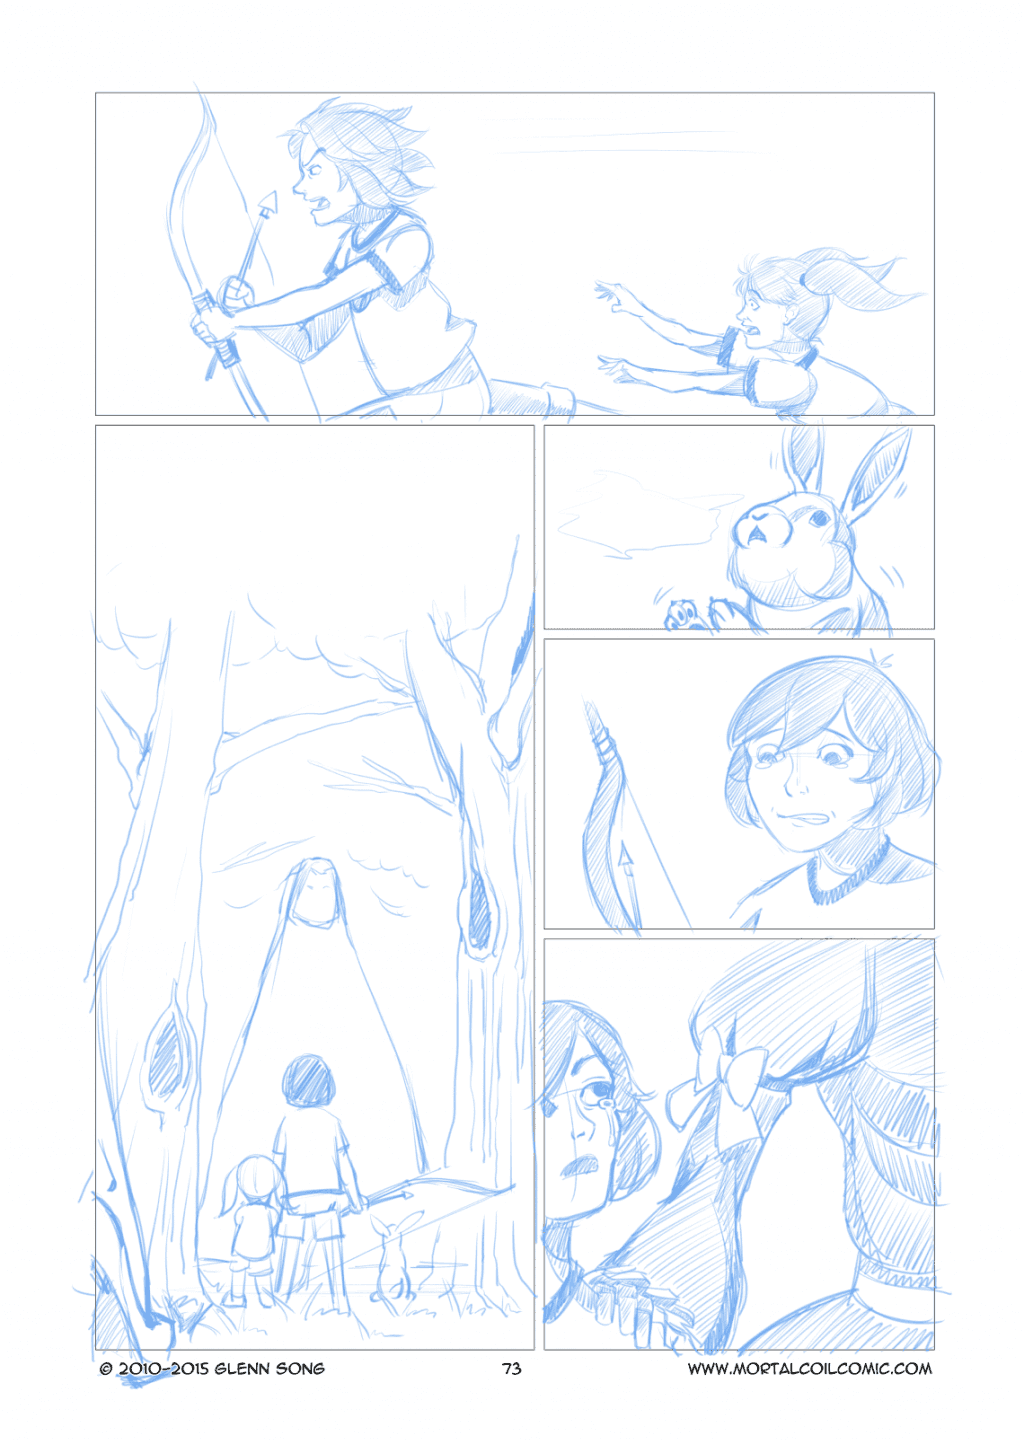 Archer of the West - 4 Pencils